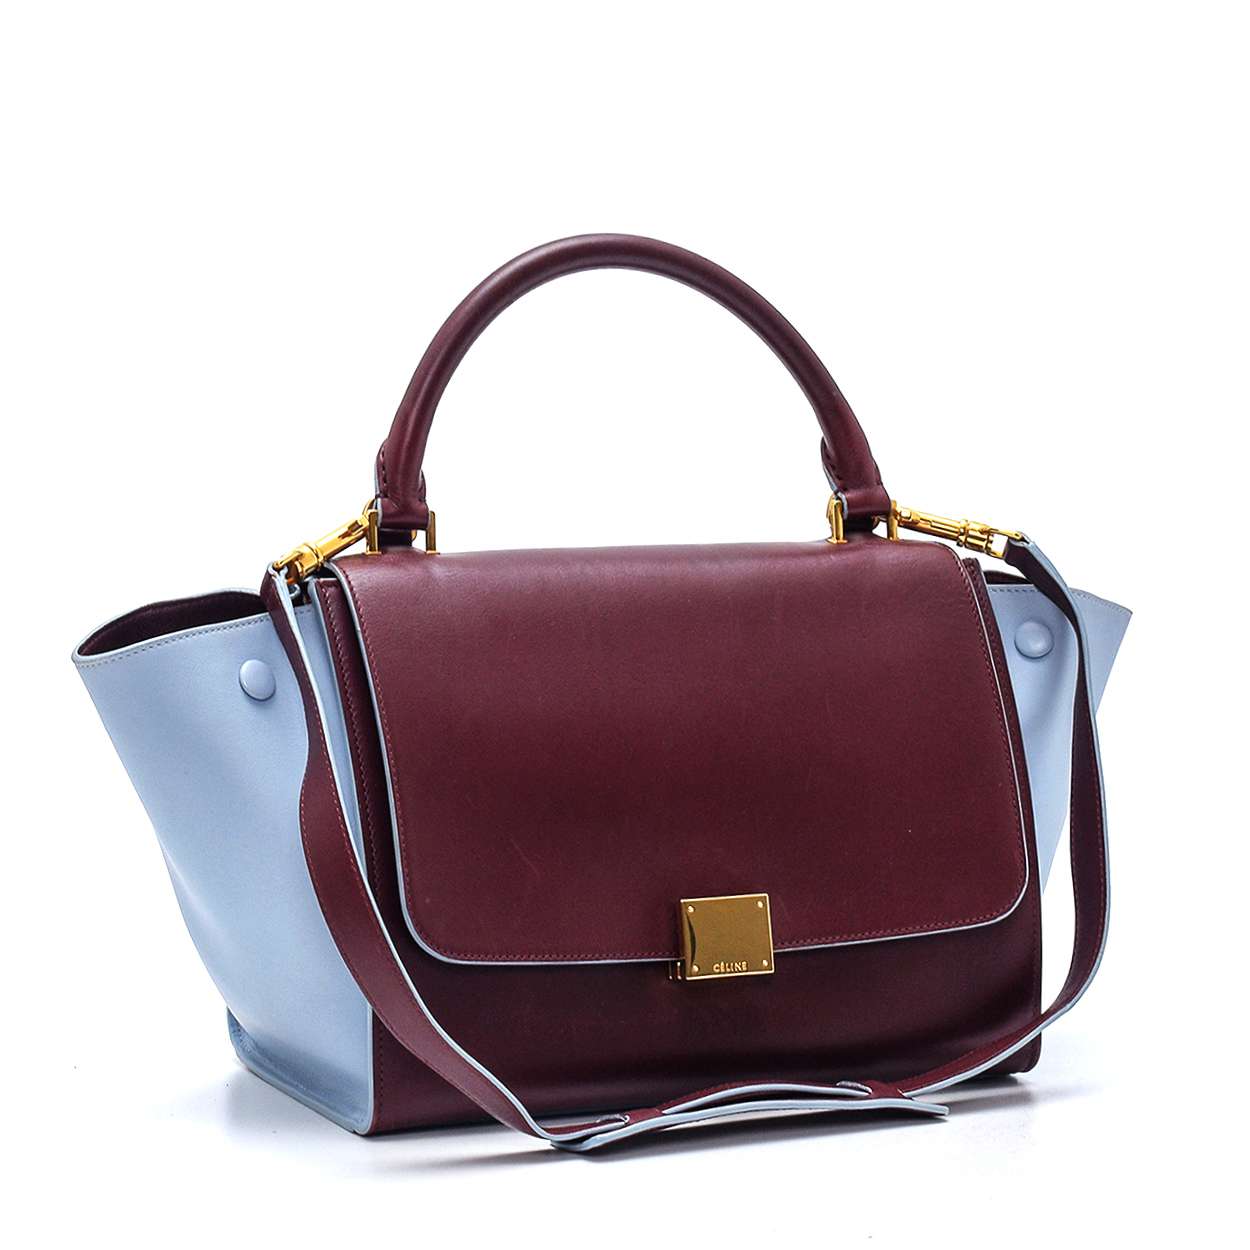 Celine - Baby Blue and Bordeaux Leather Small Trapeze Bag